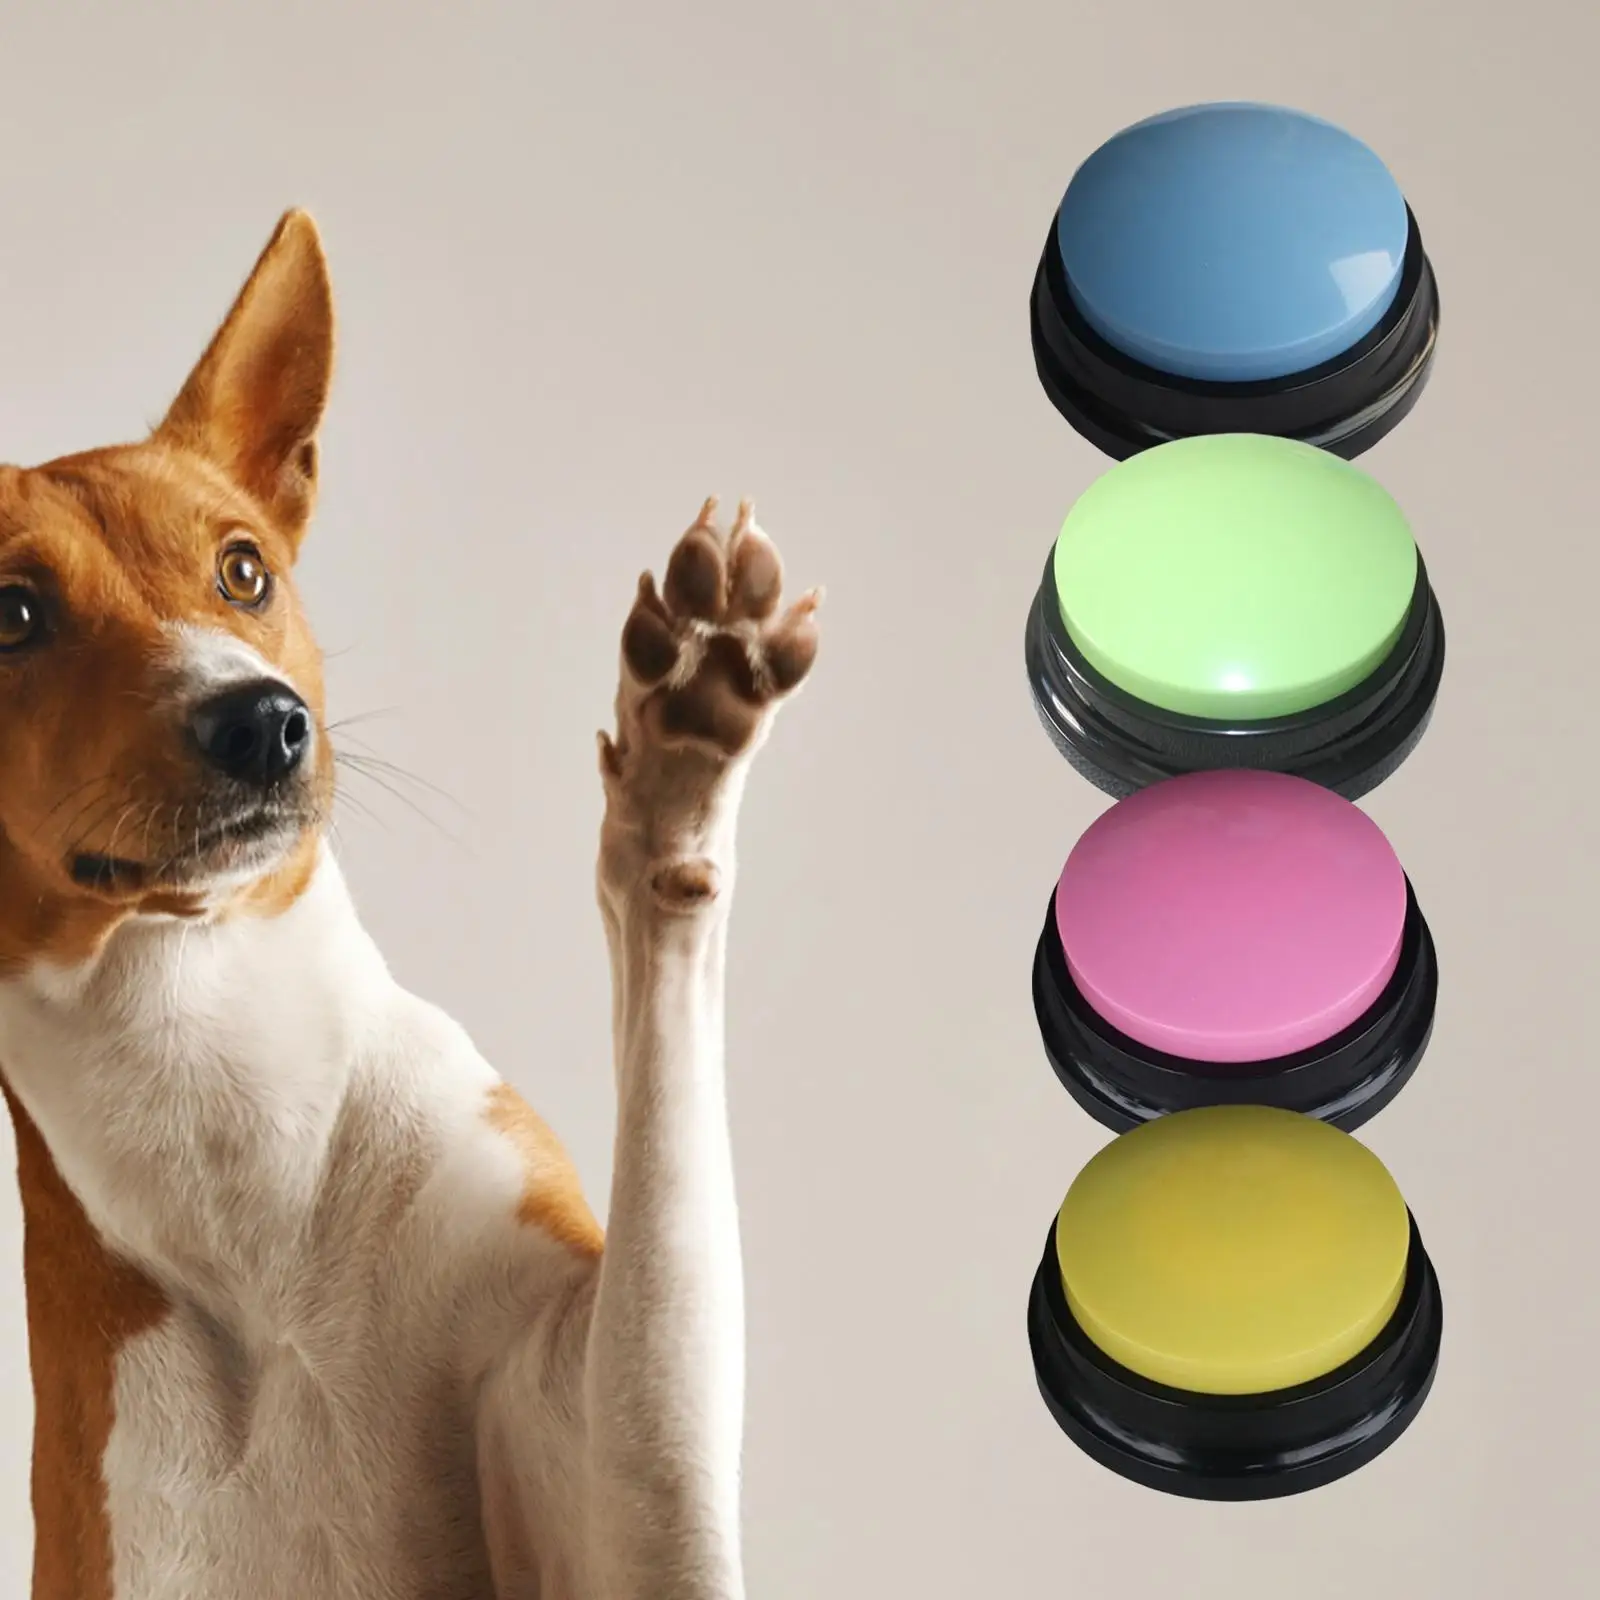 4x Recordable Dog Interactive Training Educational Toys Squeaks Voice Recording Button for Dogs Cats Kids